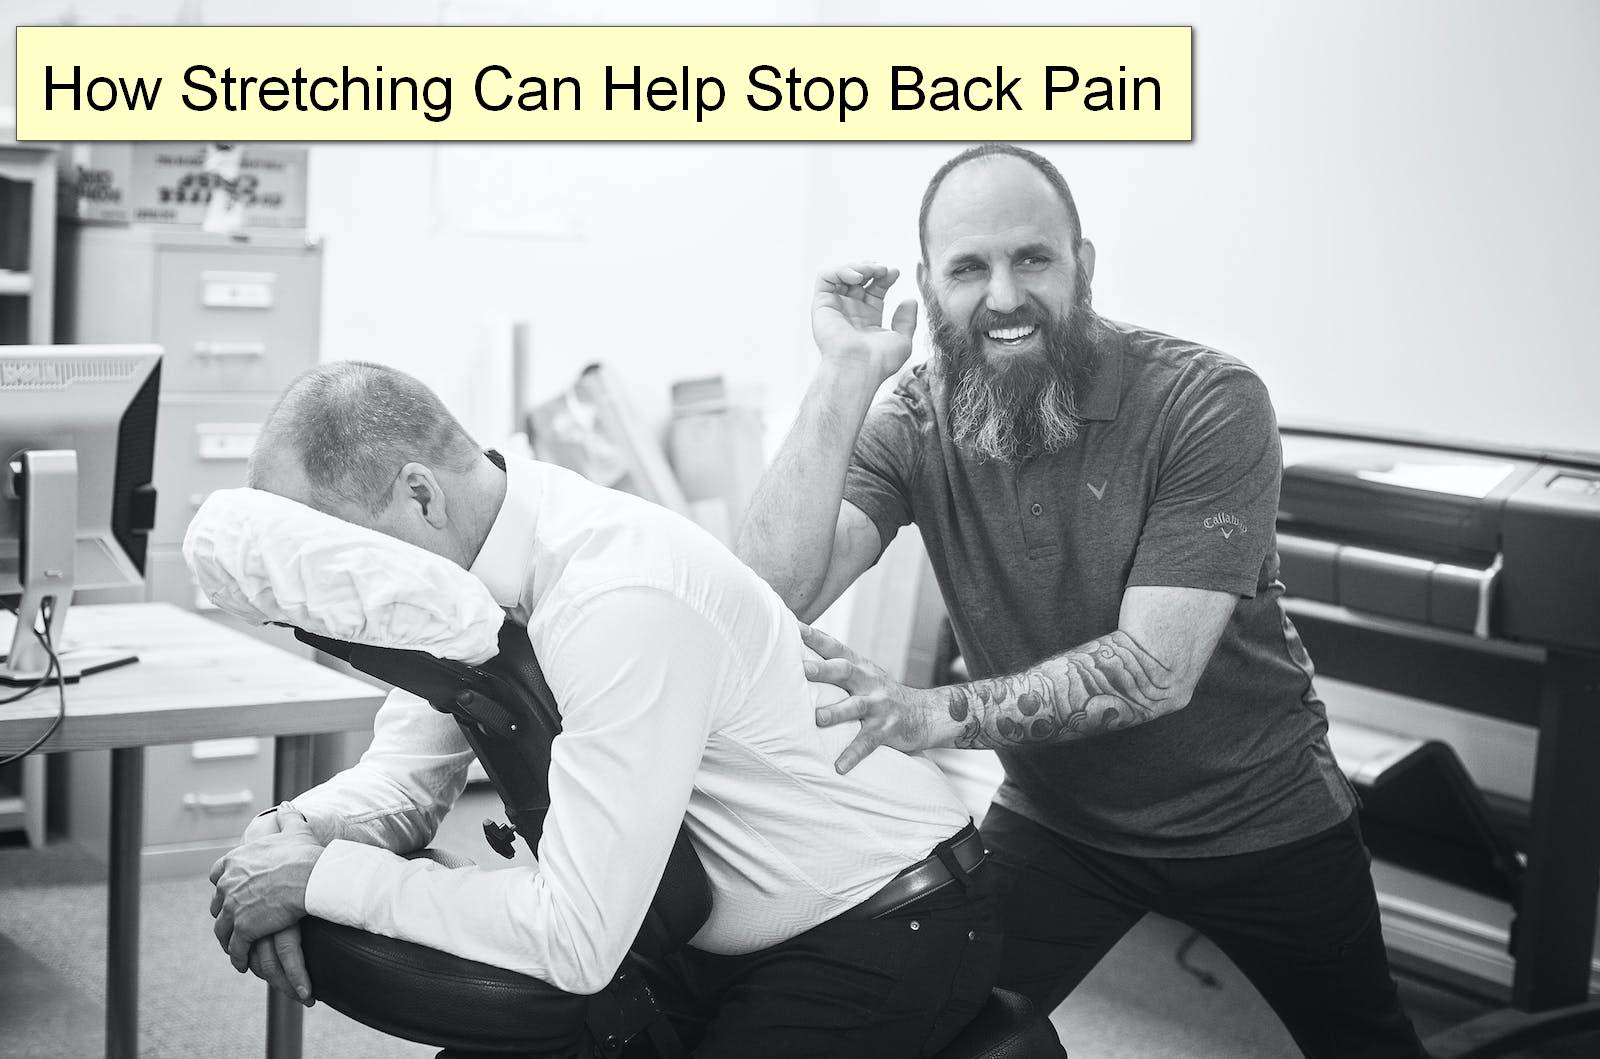 How Stretching Can Help Stop Back Pain